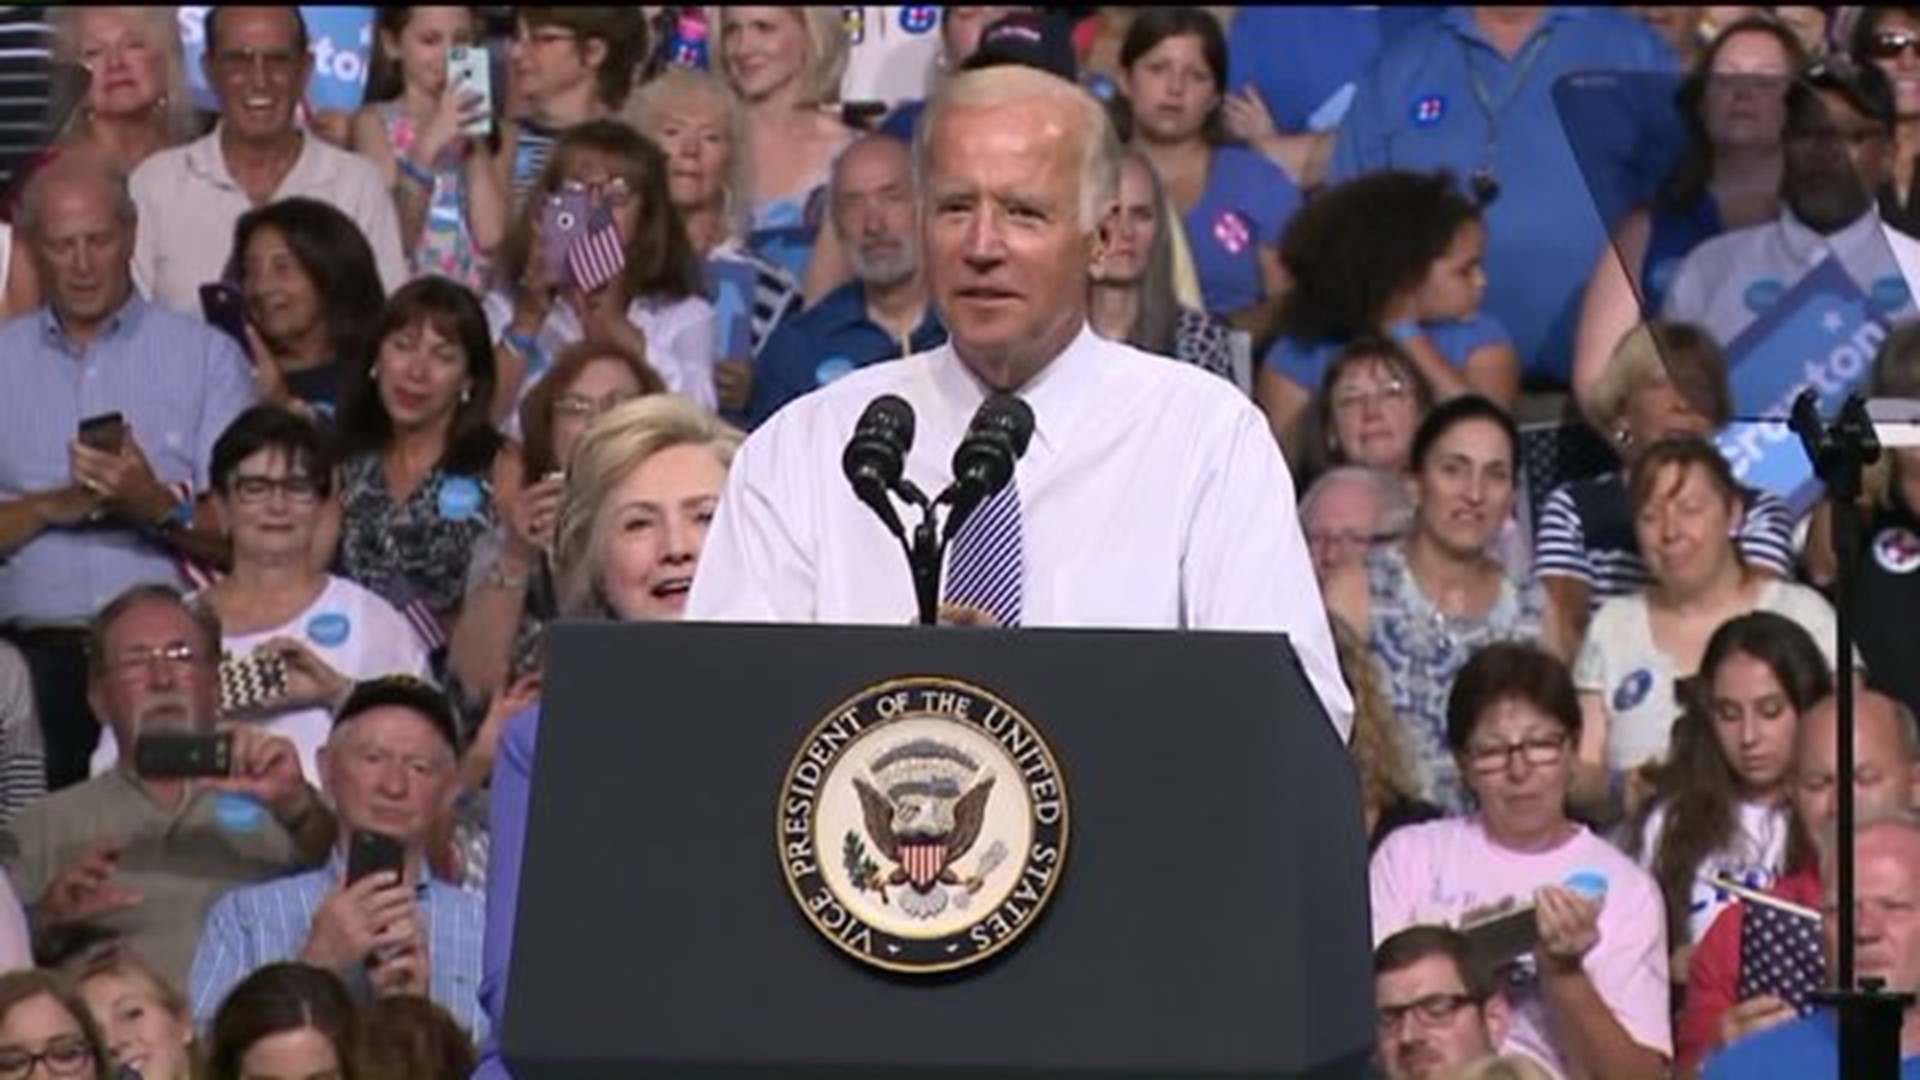 Biden to Campaign for Hillary Clinton in Luzerne County